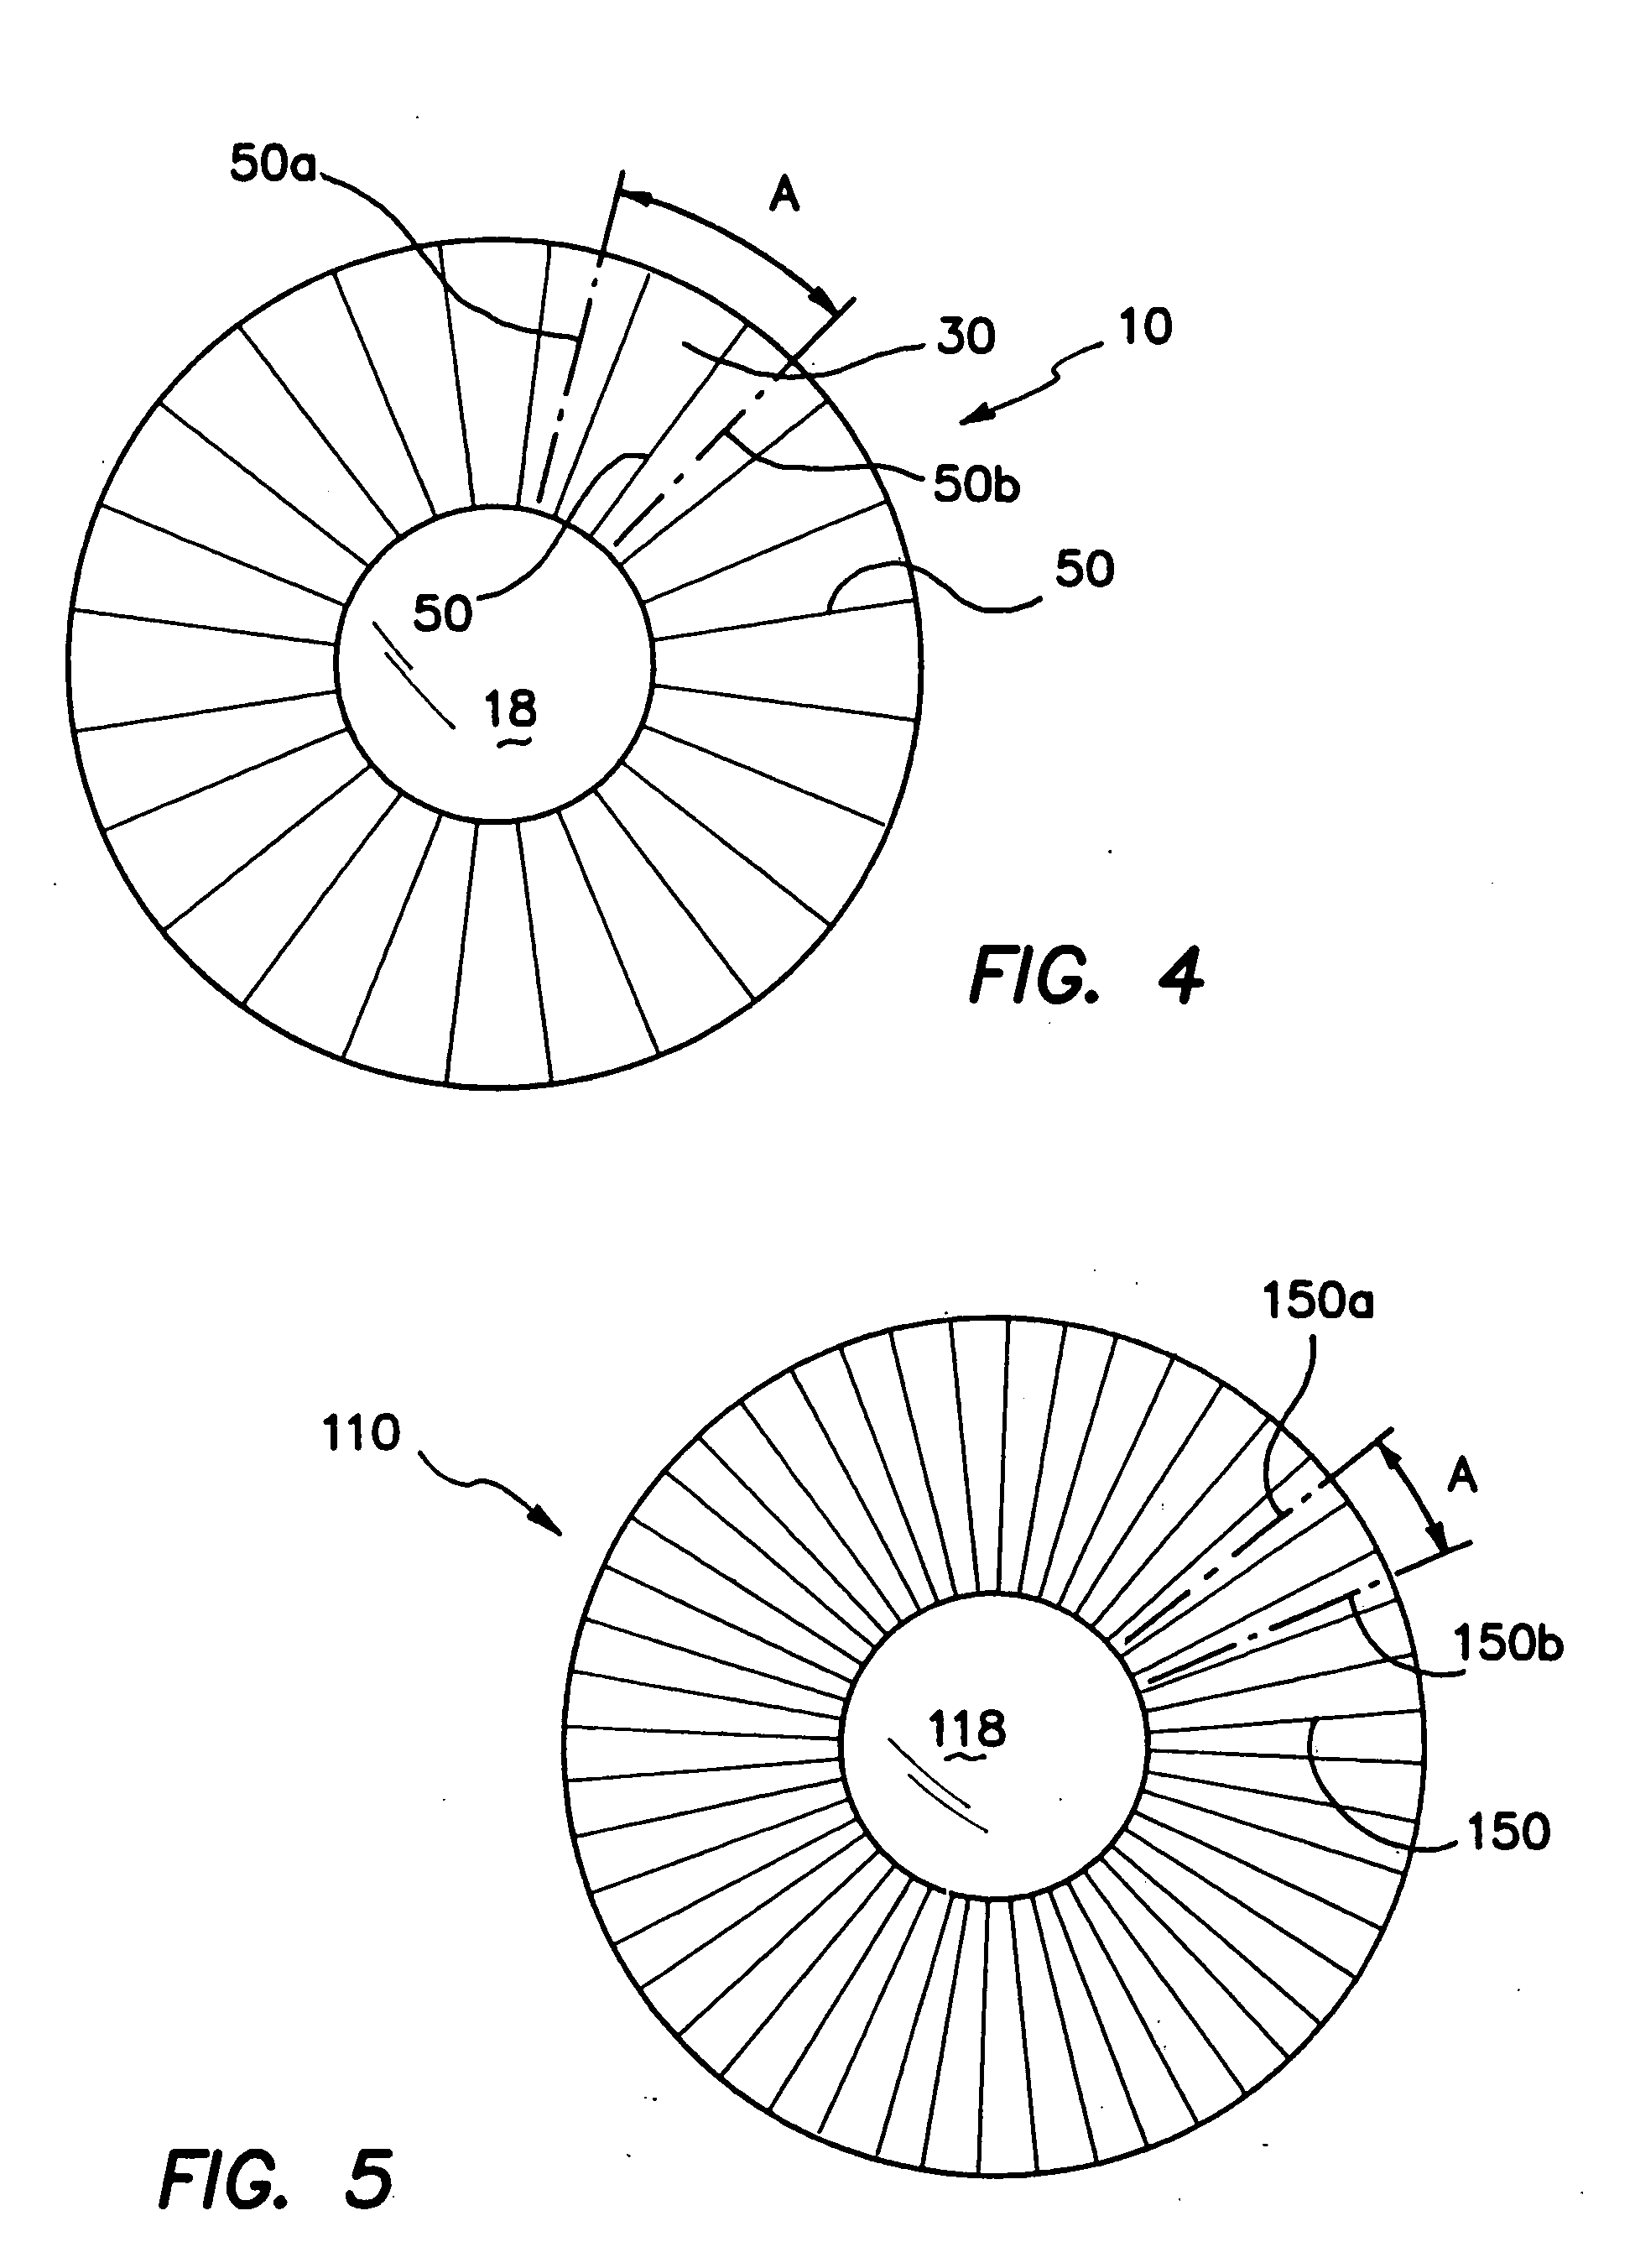 Contact lenses with blended microchannels